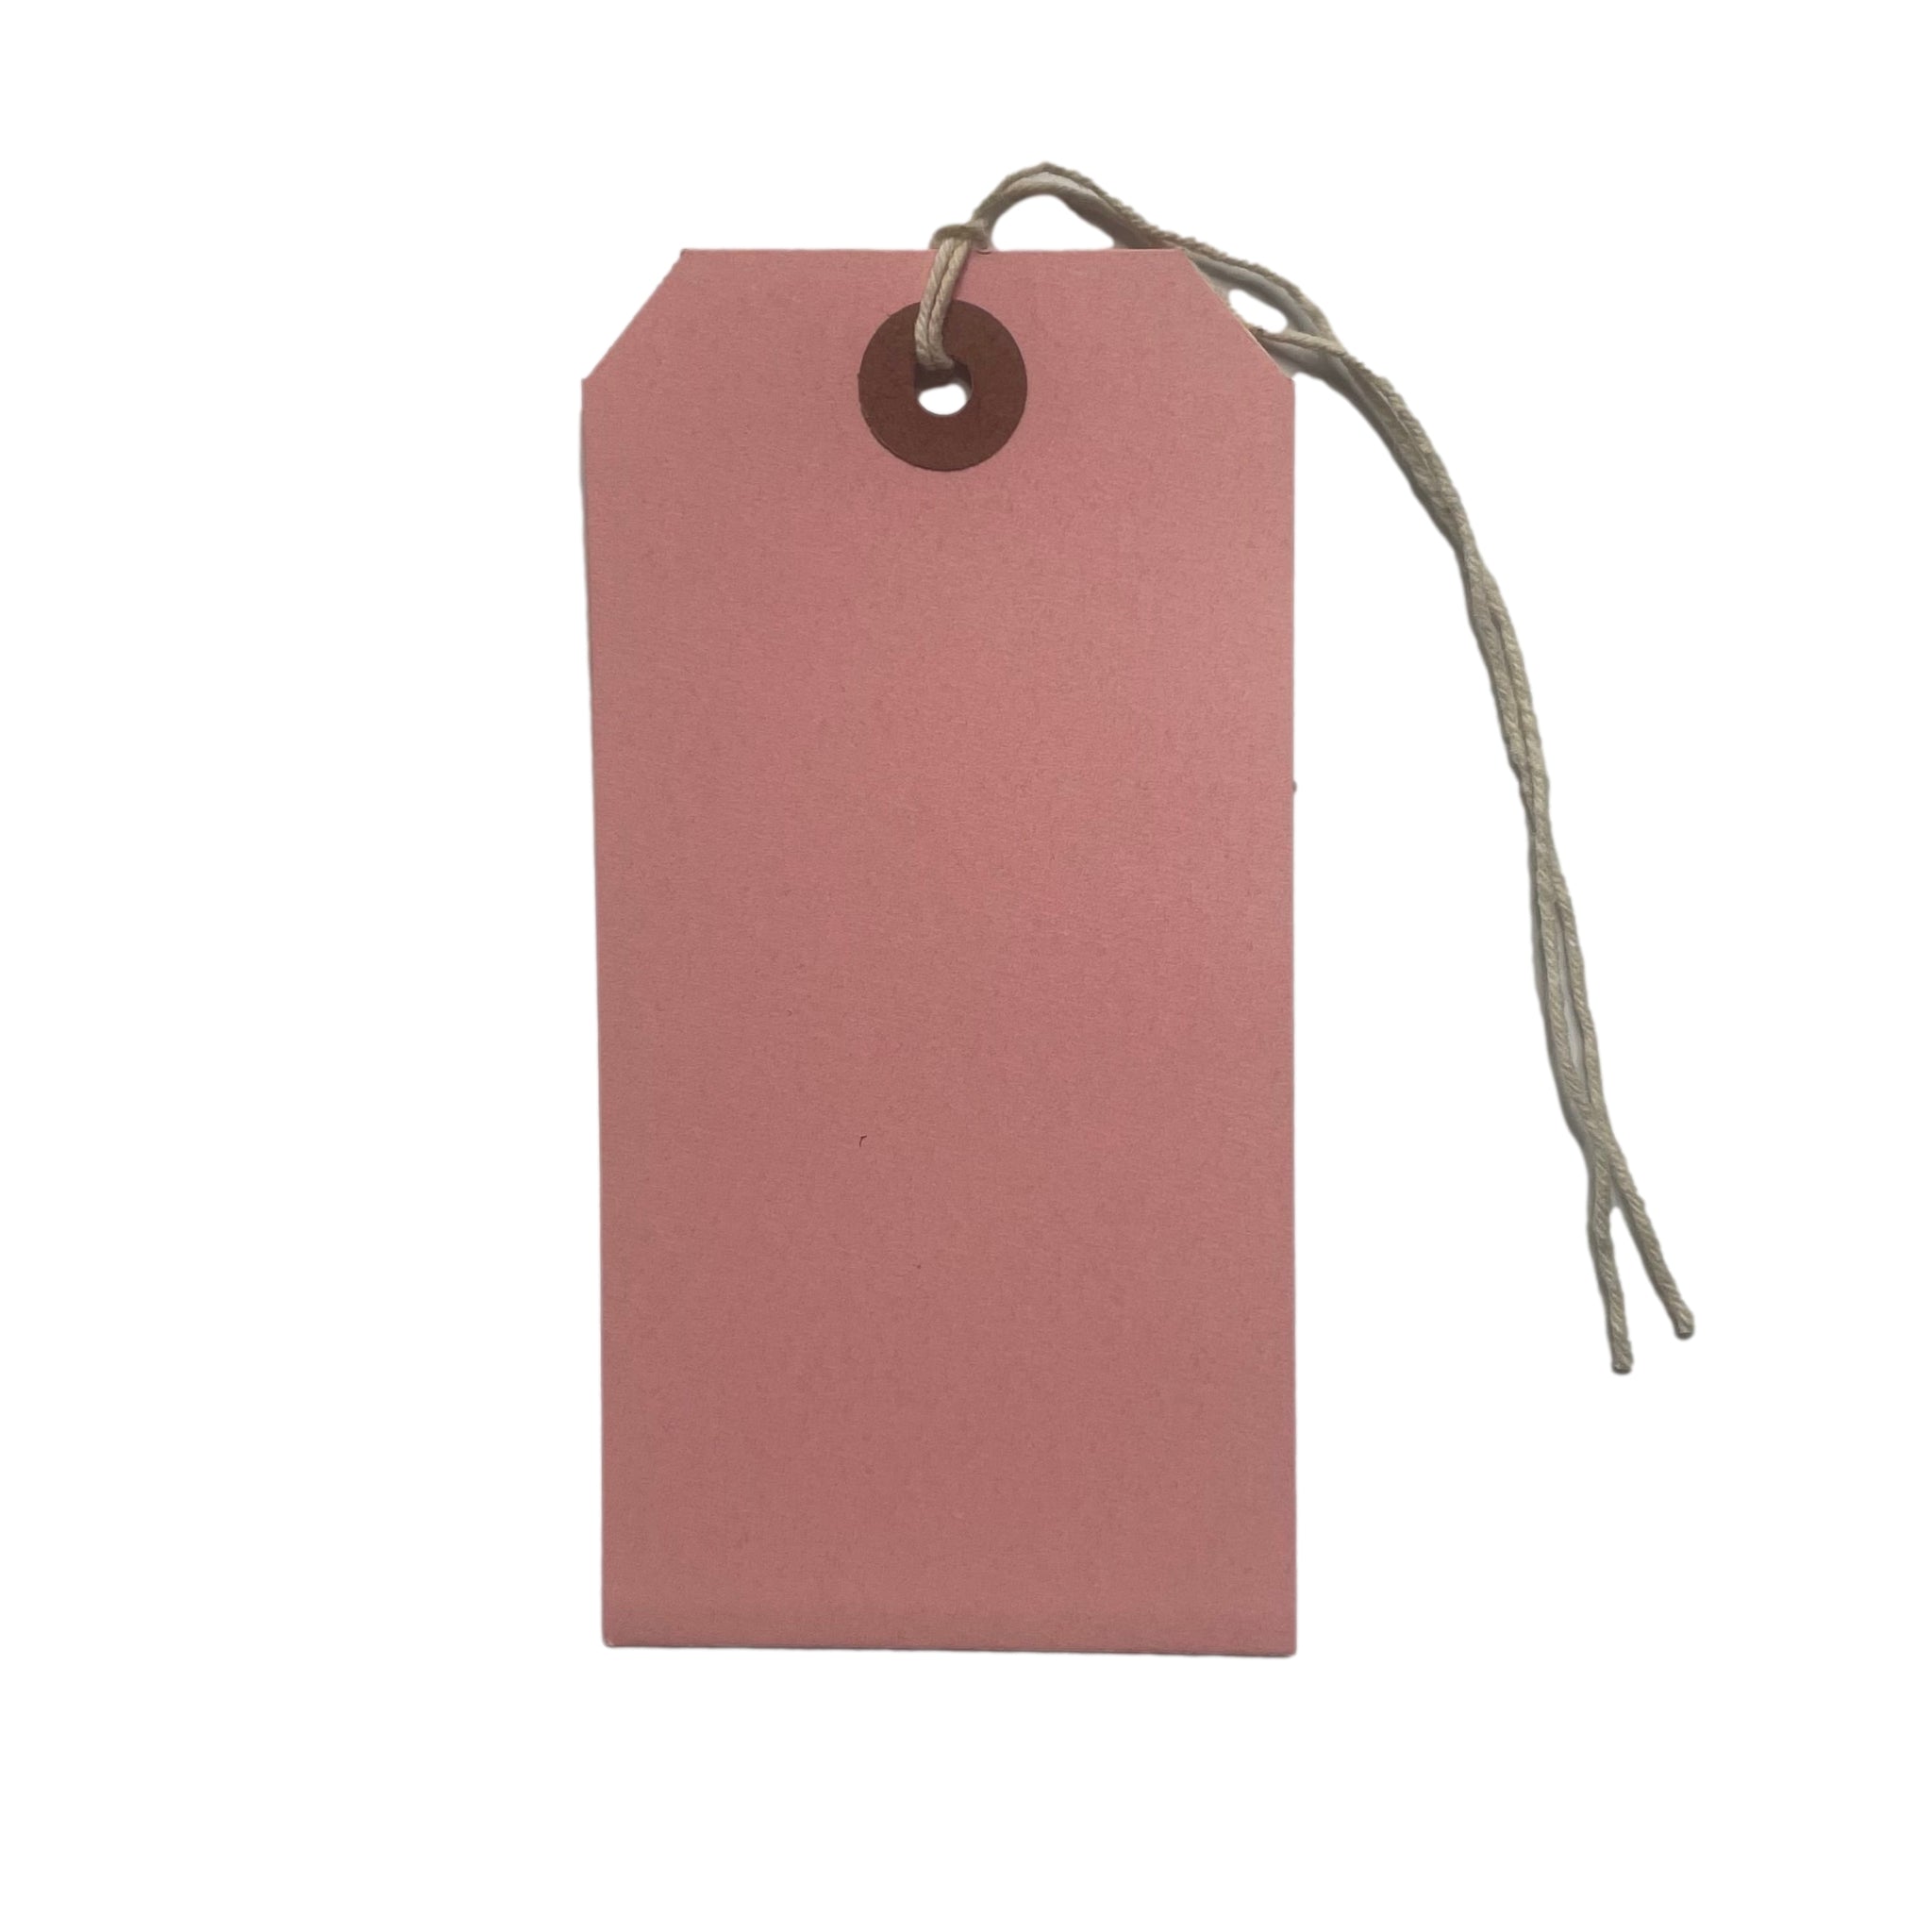 Box of 1000 120 x 60mm Light Pink Luggage Tags